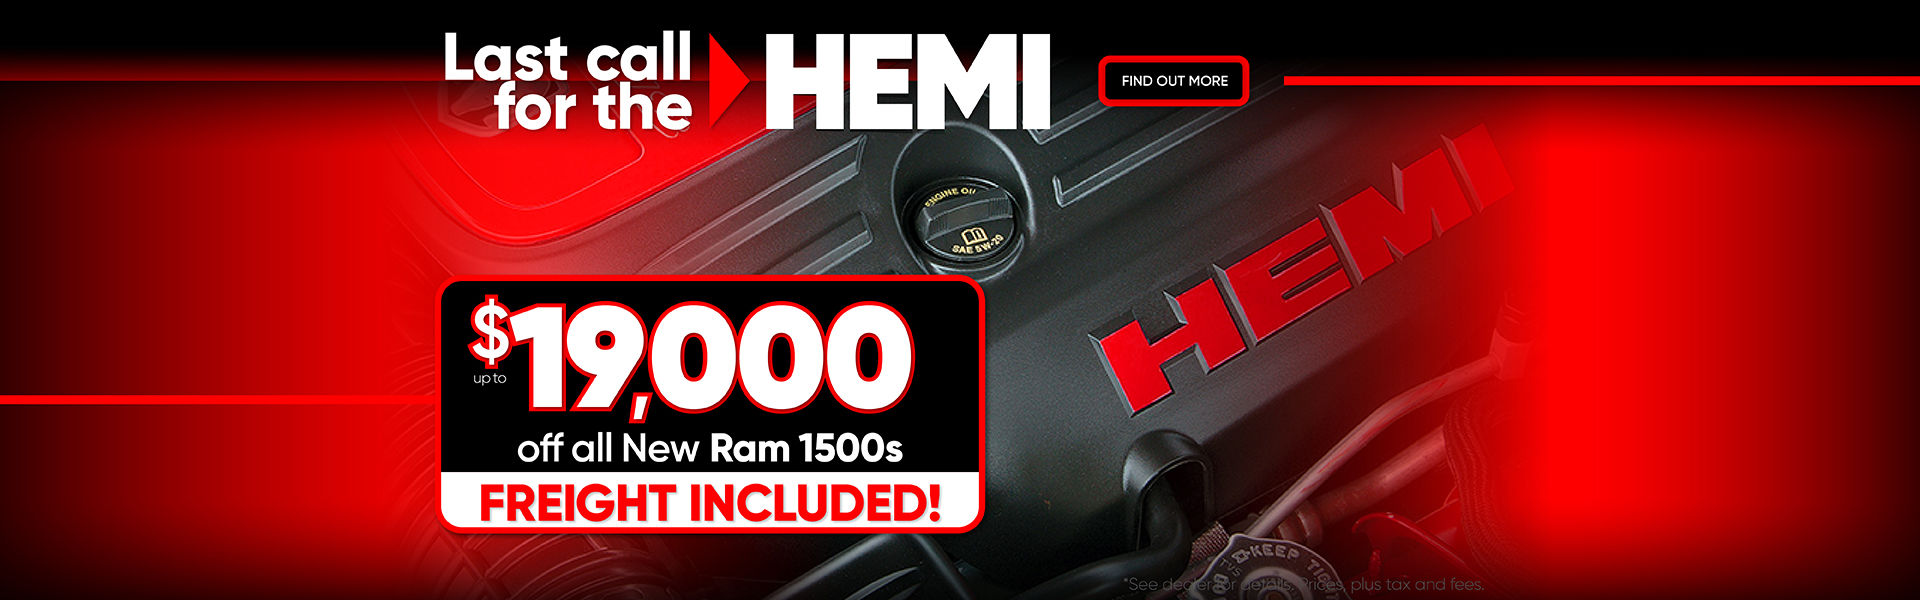 Get a Hemi before they're gone